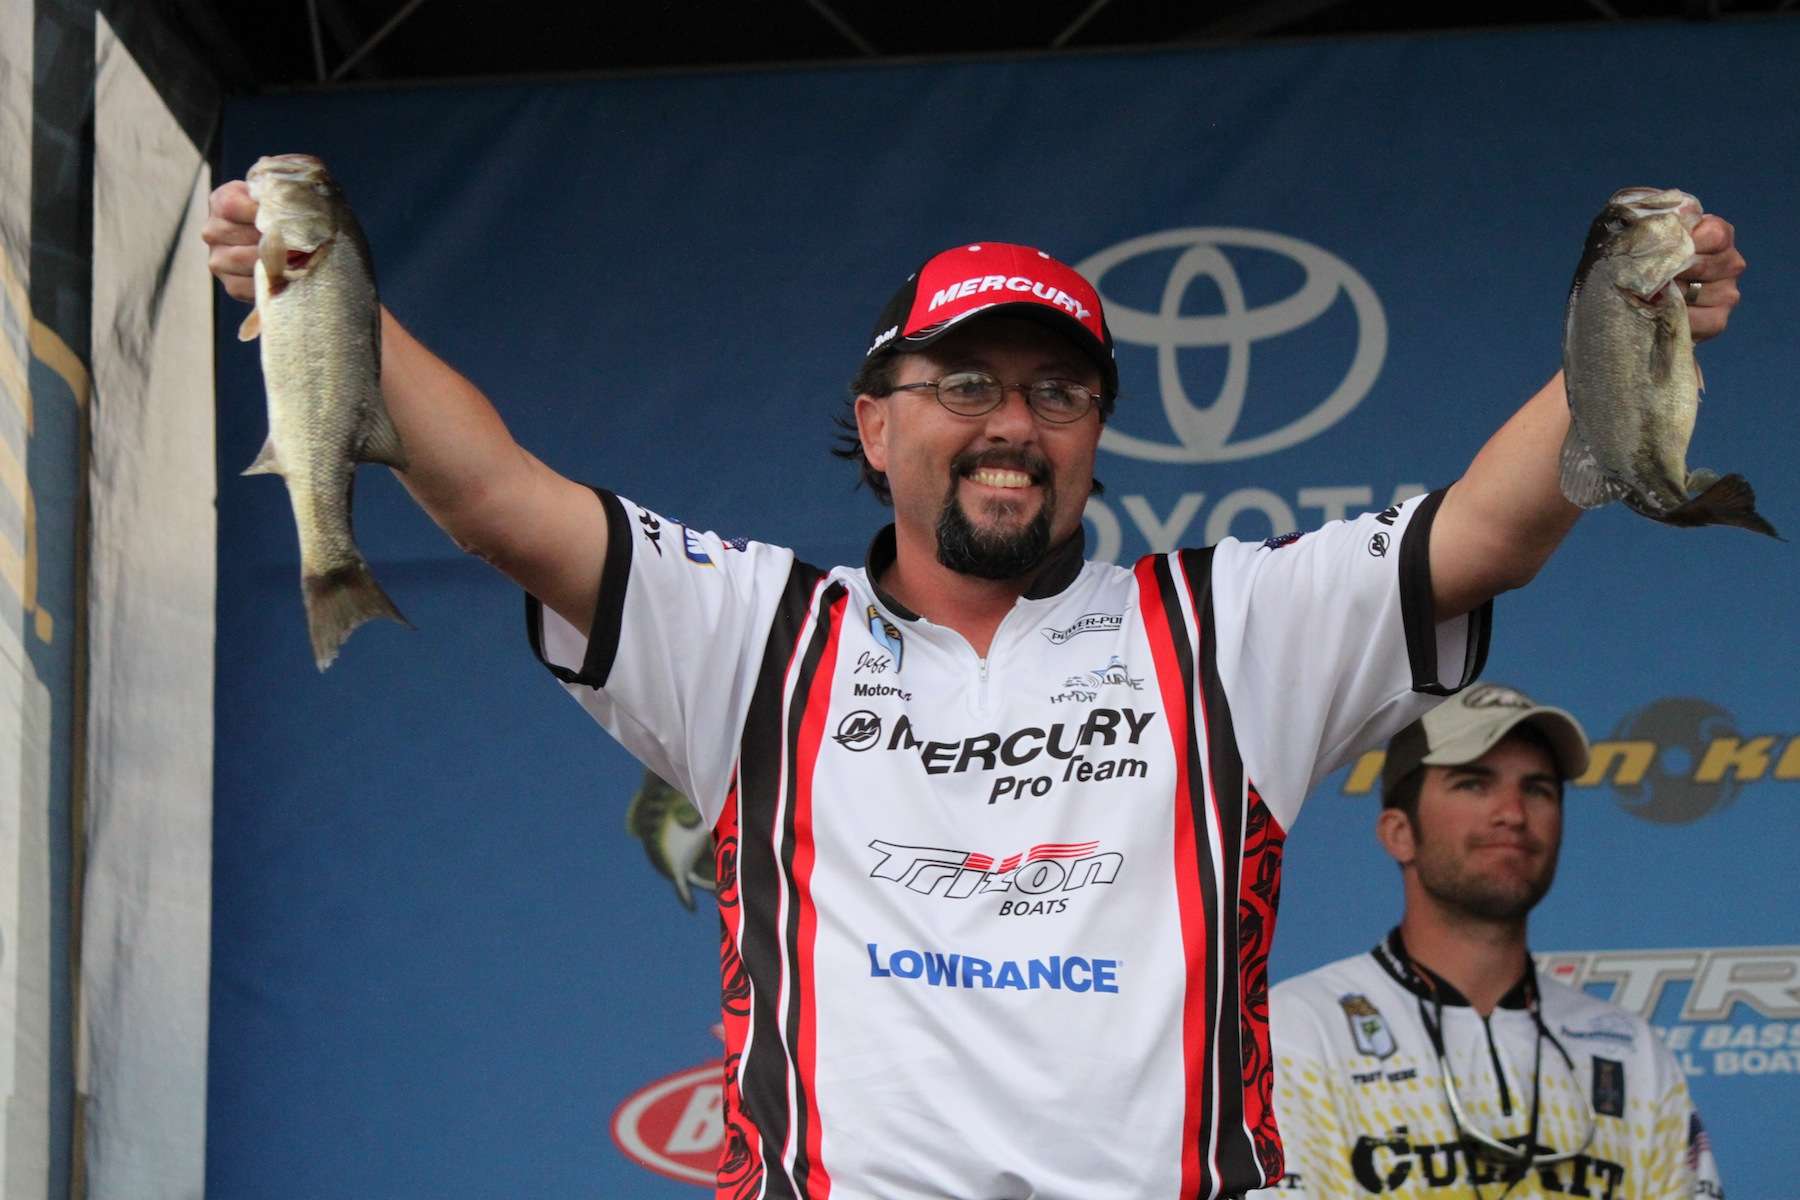 Jeff Lugar's 6-8 on the final day lands him in third for the event that he won last year. 